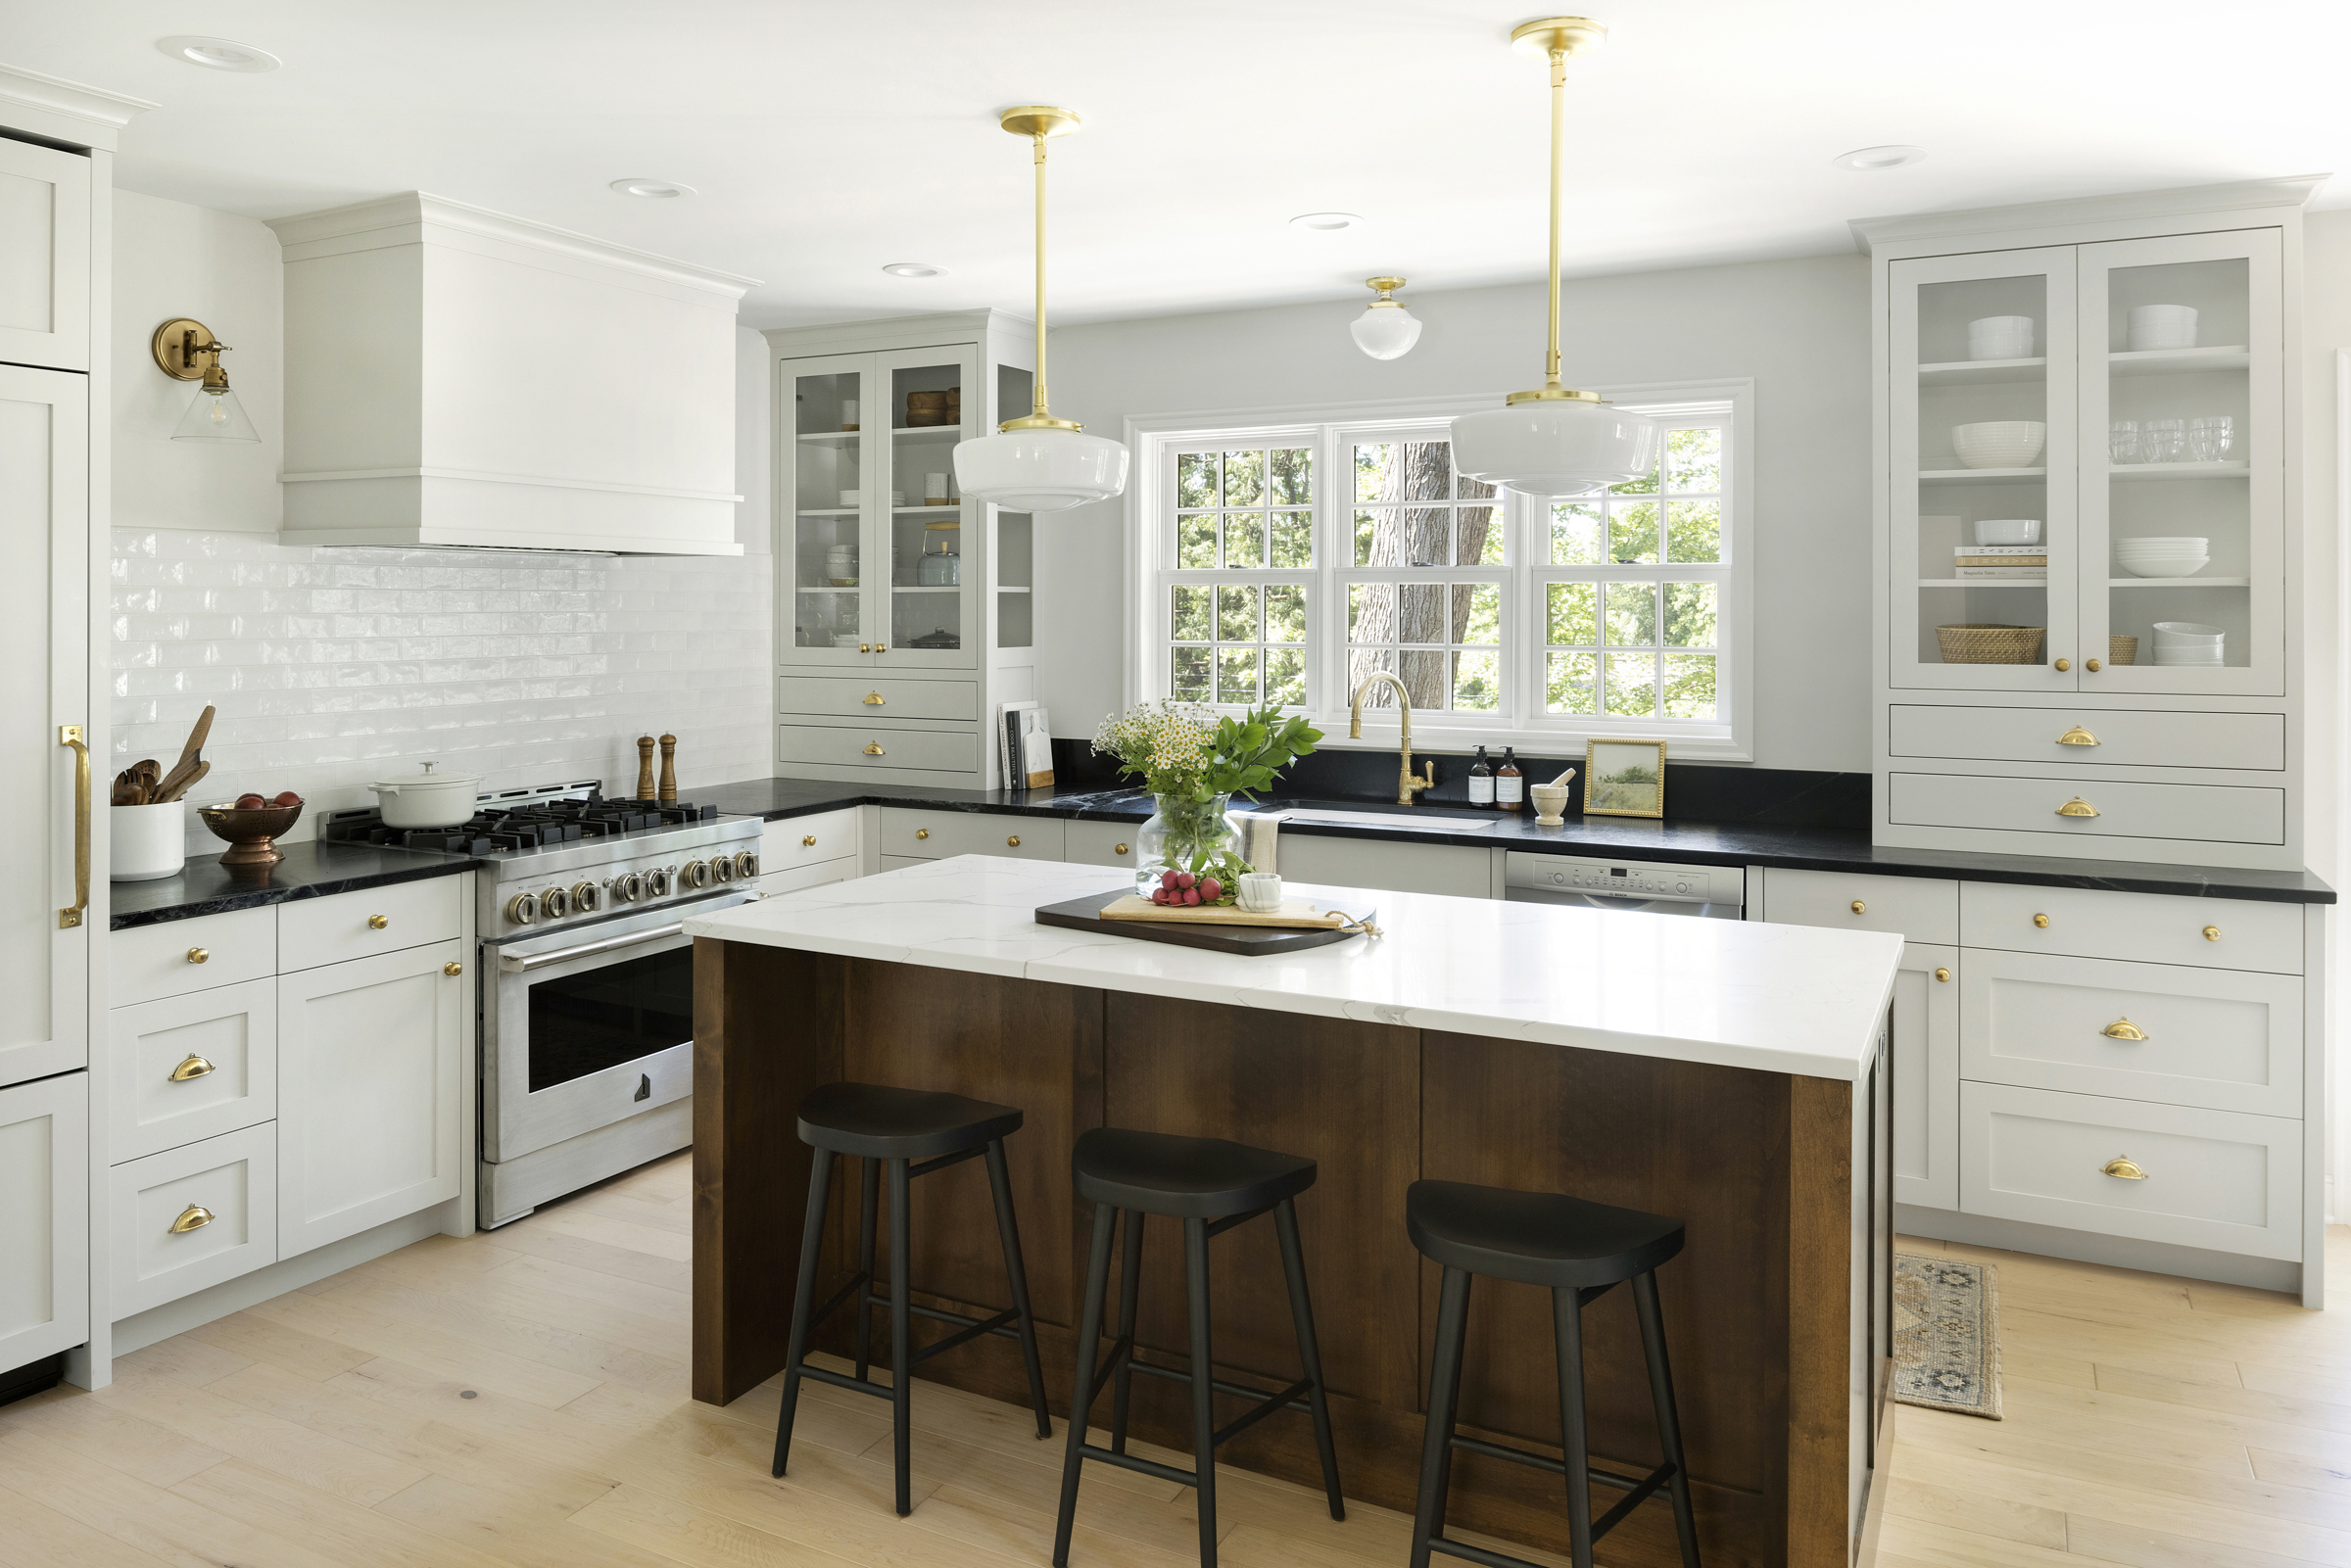 Twin Cities kitchen renovation with white perimeter cabinets, dark stained island, and two tone countertops.